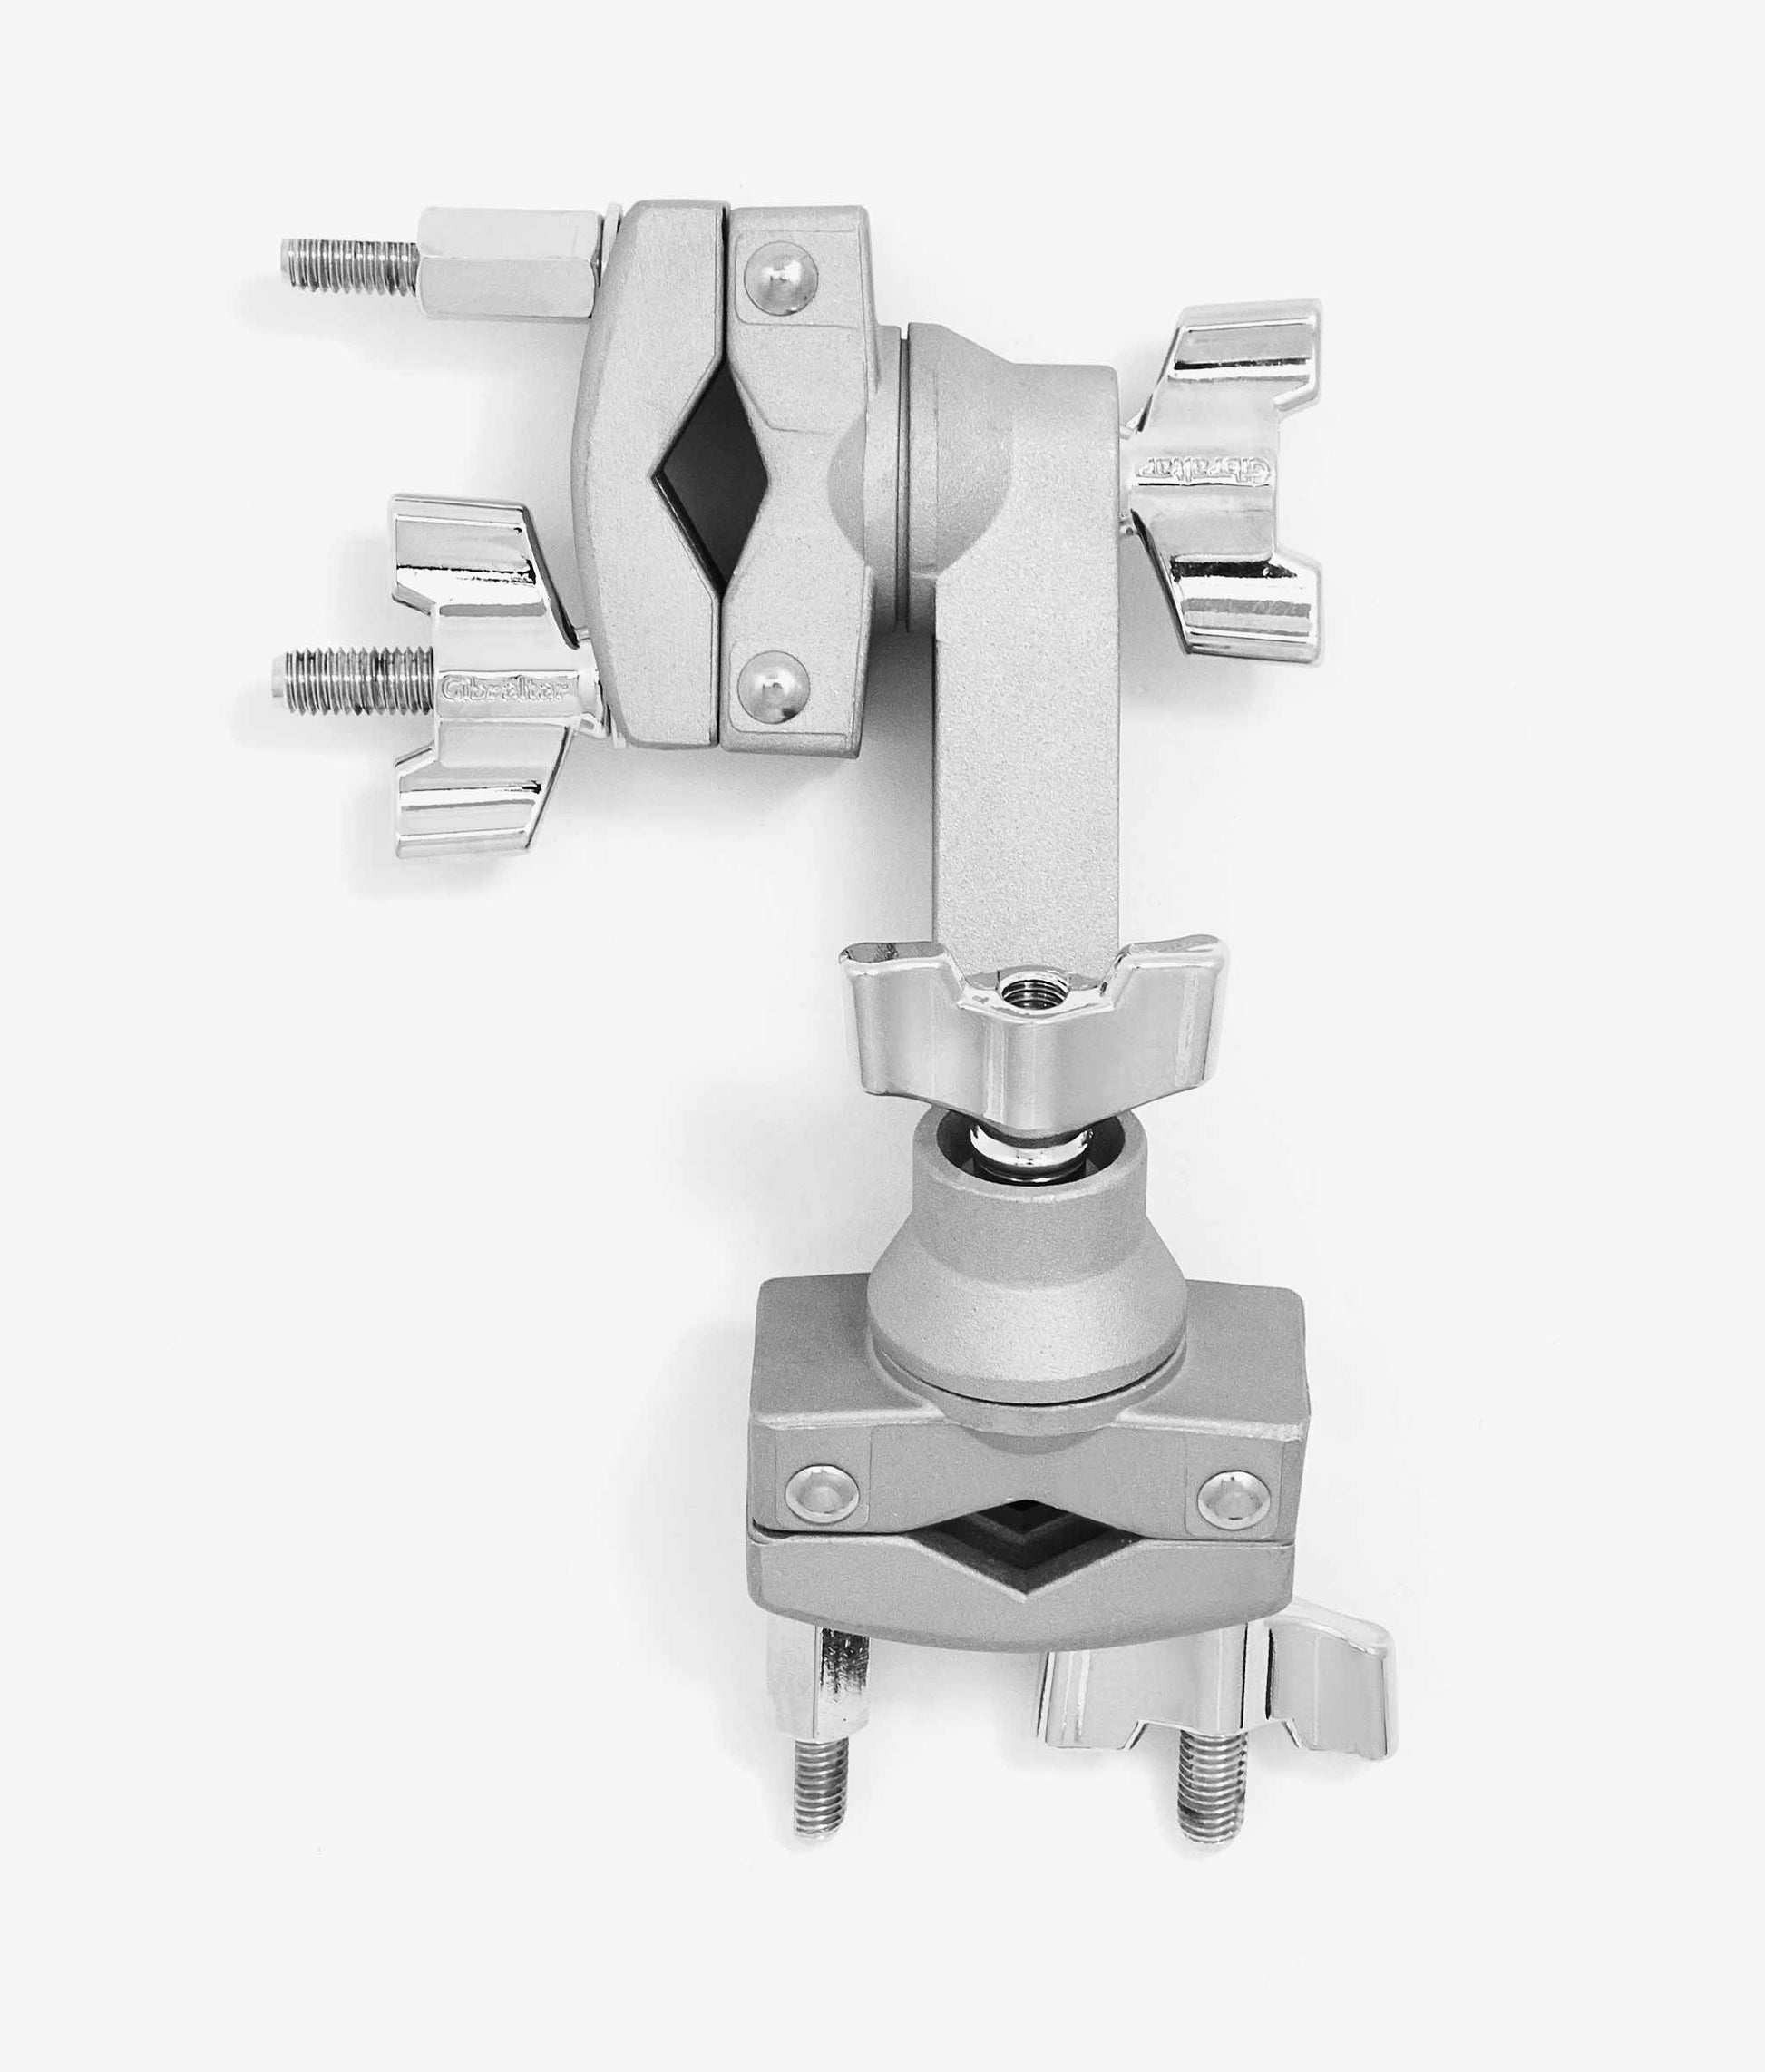  Gibraltar SC-PUGC 2-Way Offset Multi Clamp for Drum / Cymbal Stands & Holders 2 way multi clamp